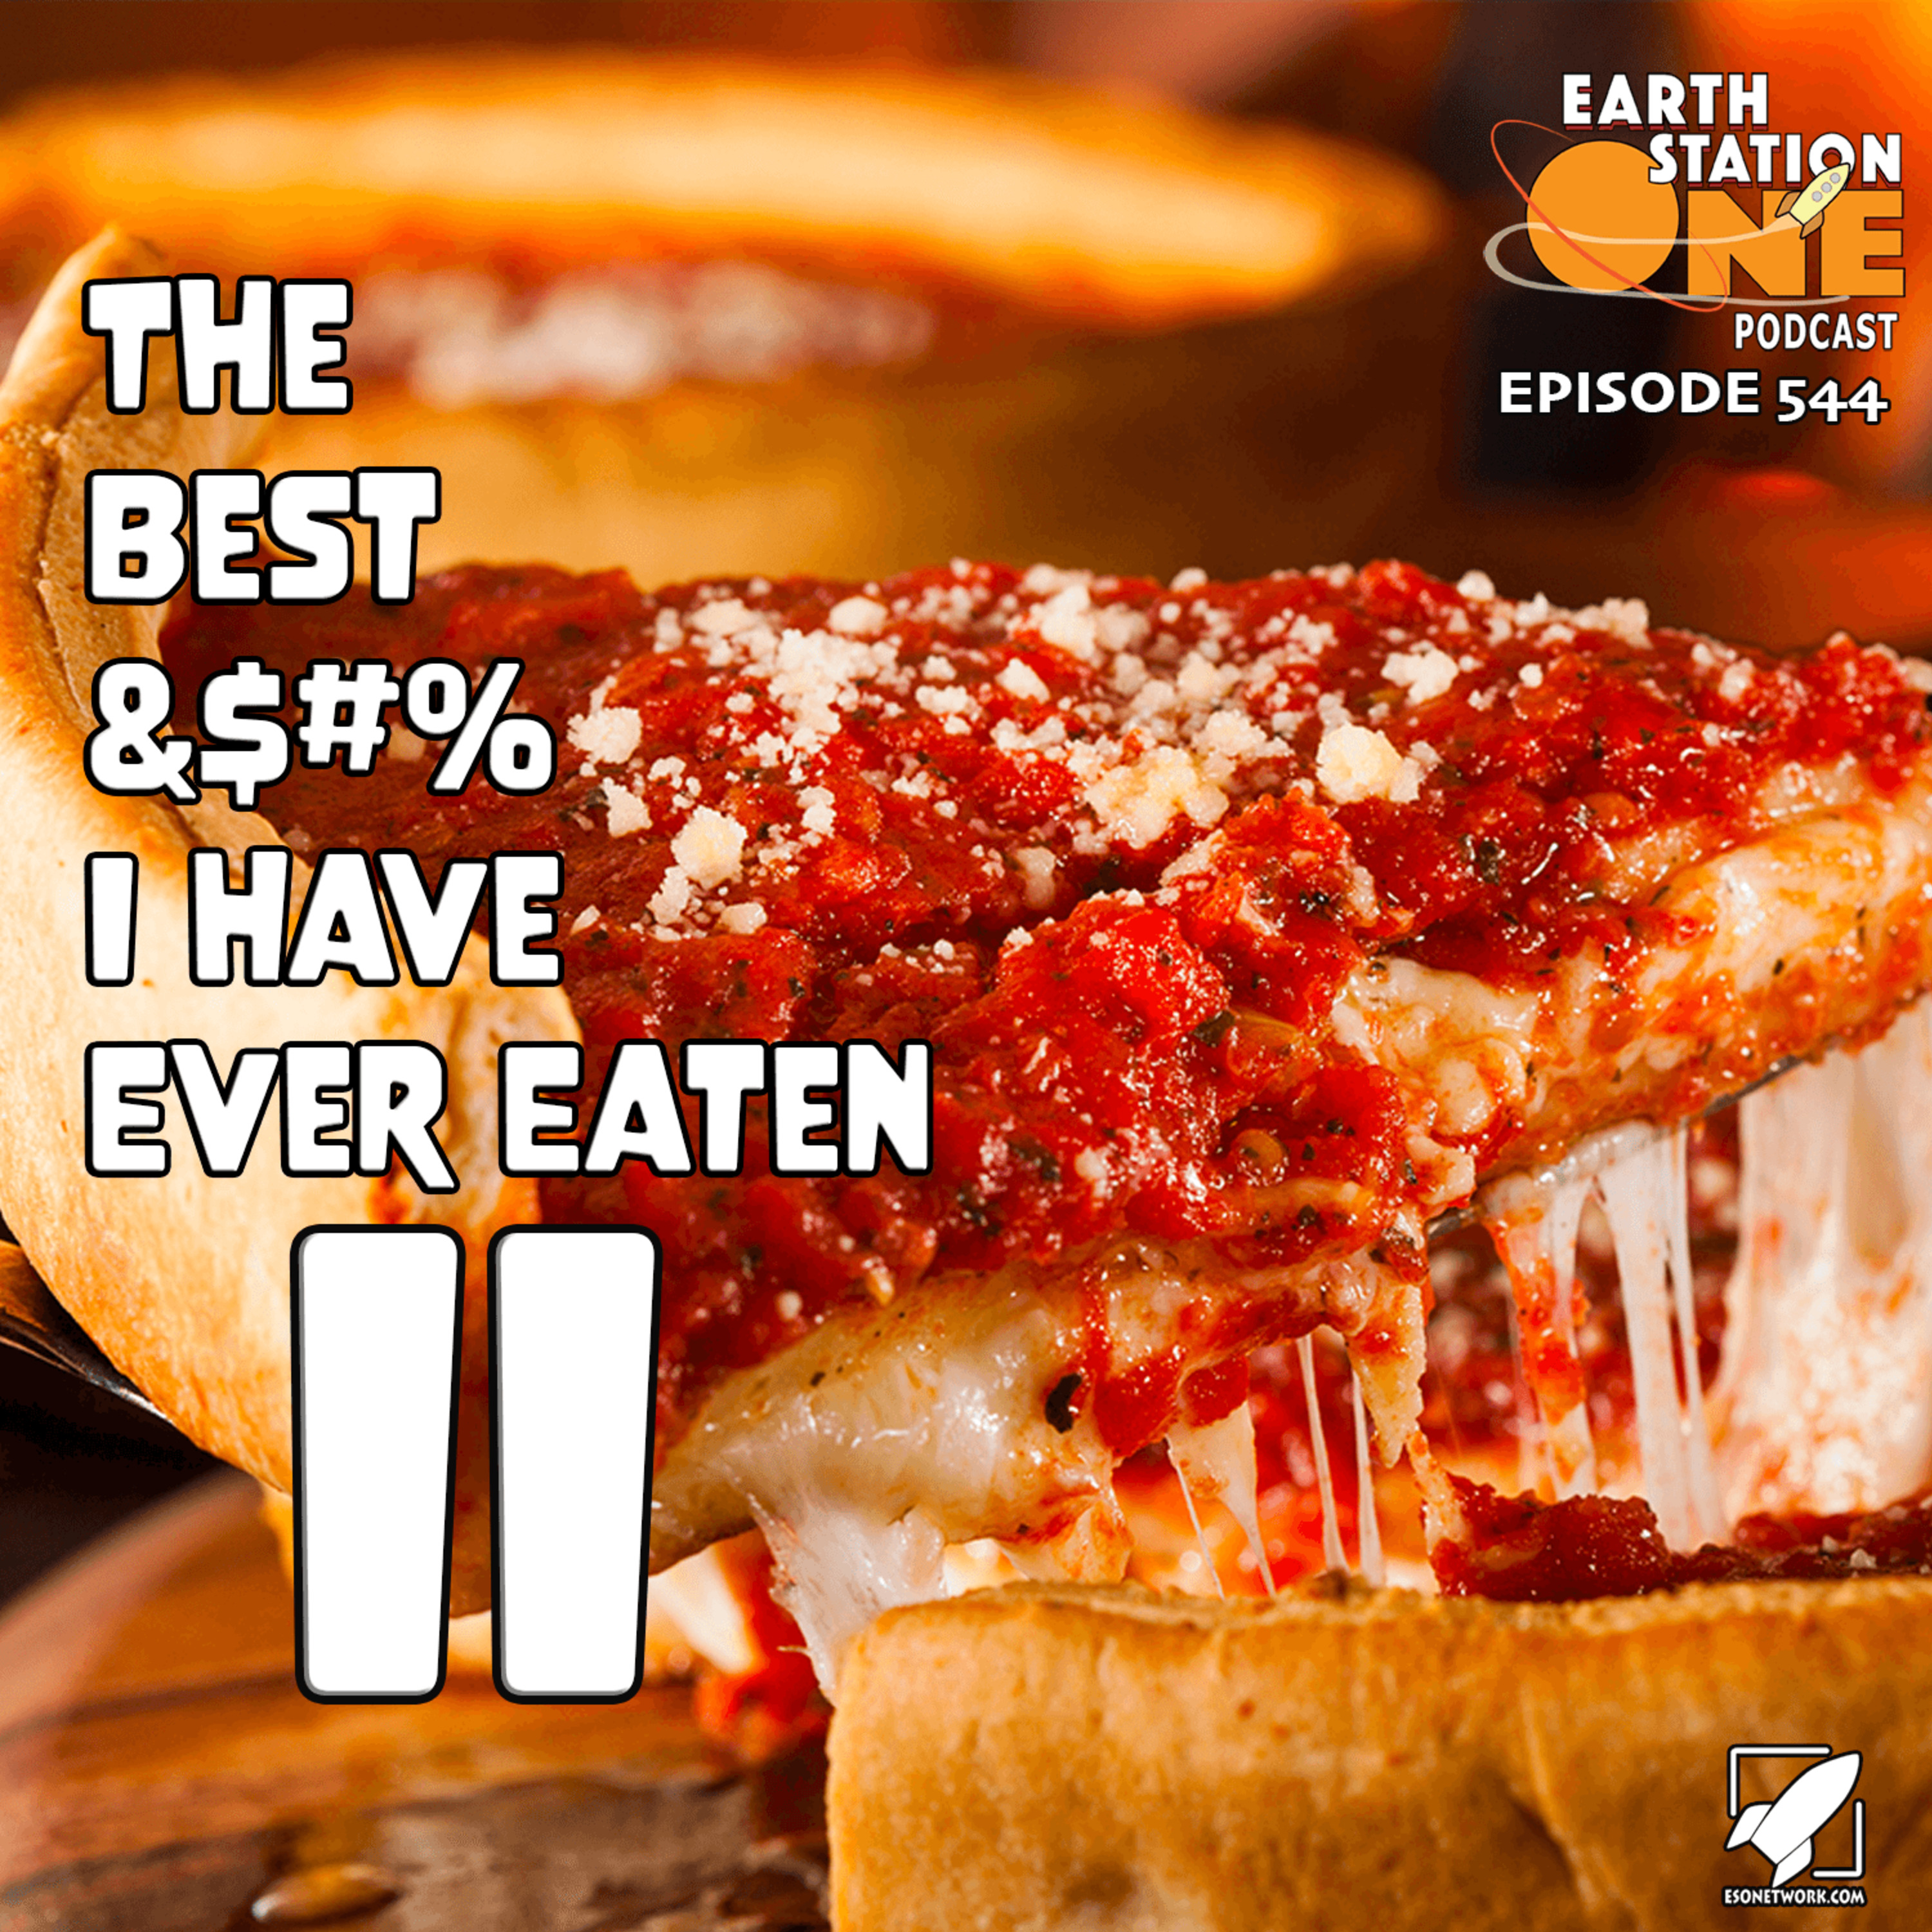 The Earth Station One Podcast - The Best &#$@ I Have Ever Eaten  II